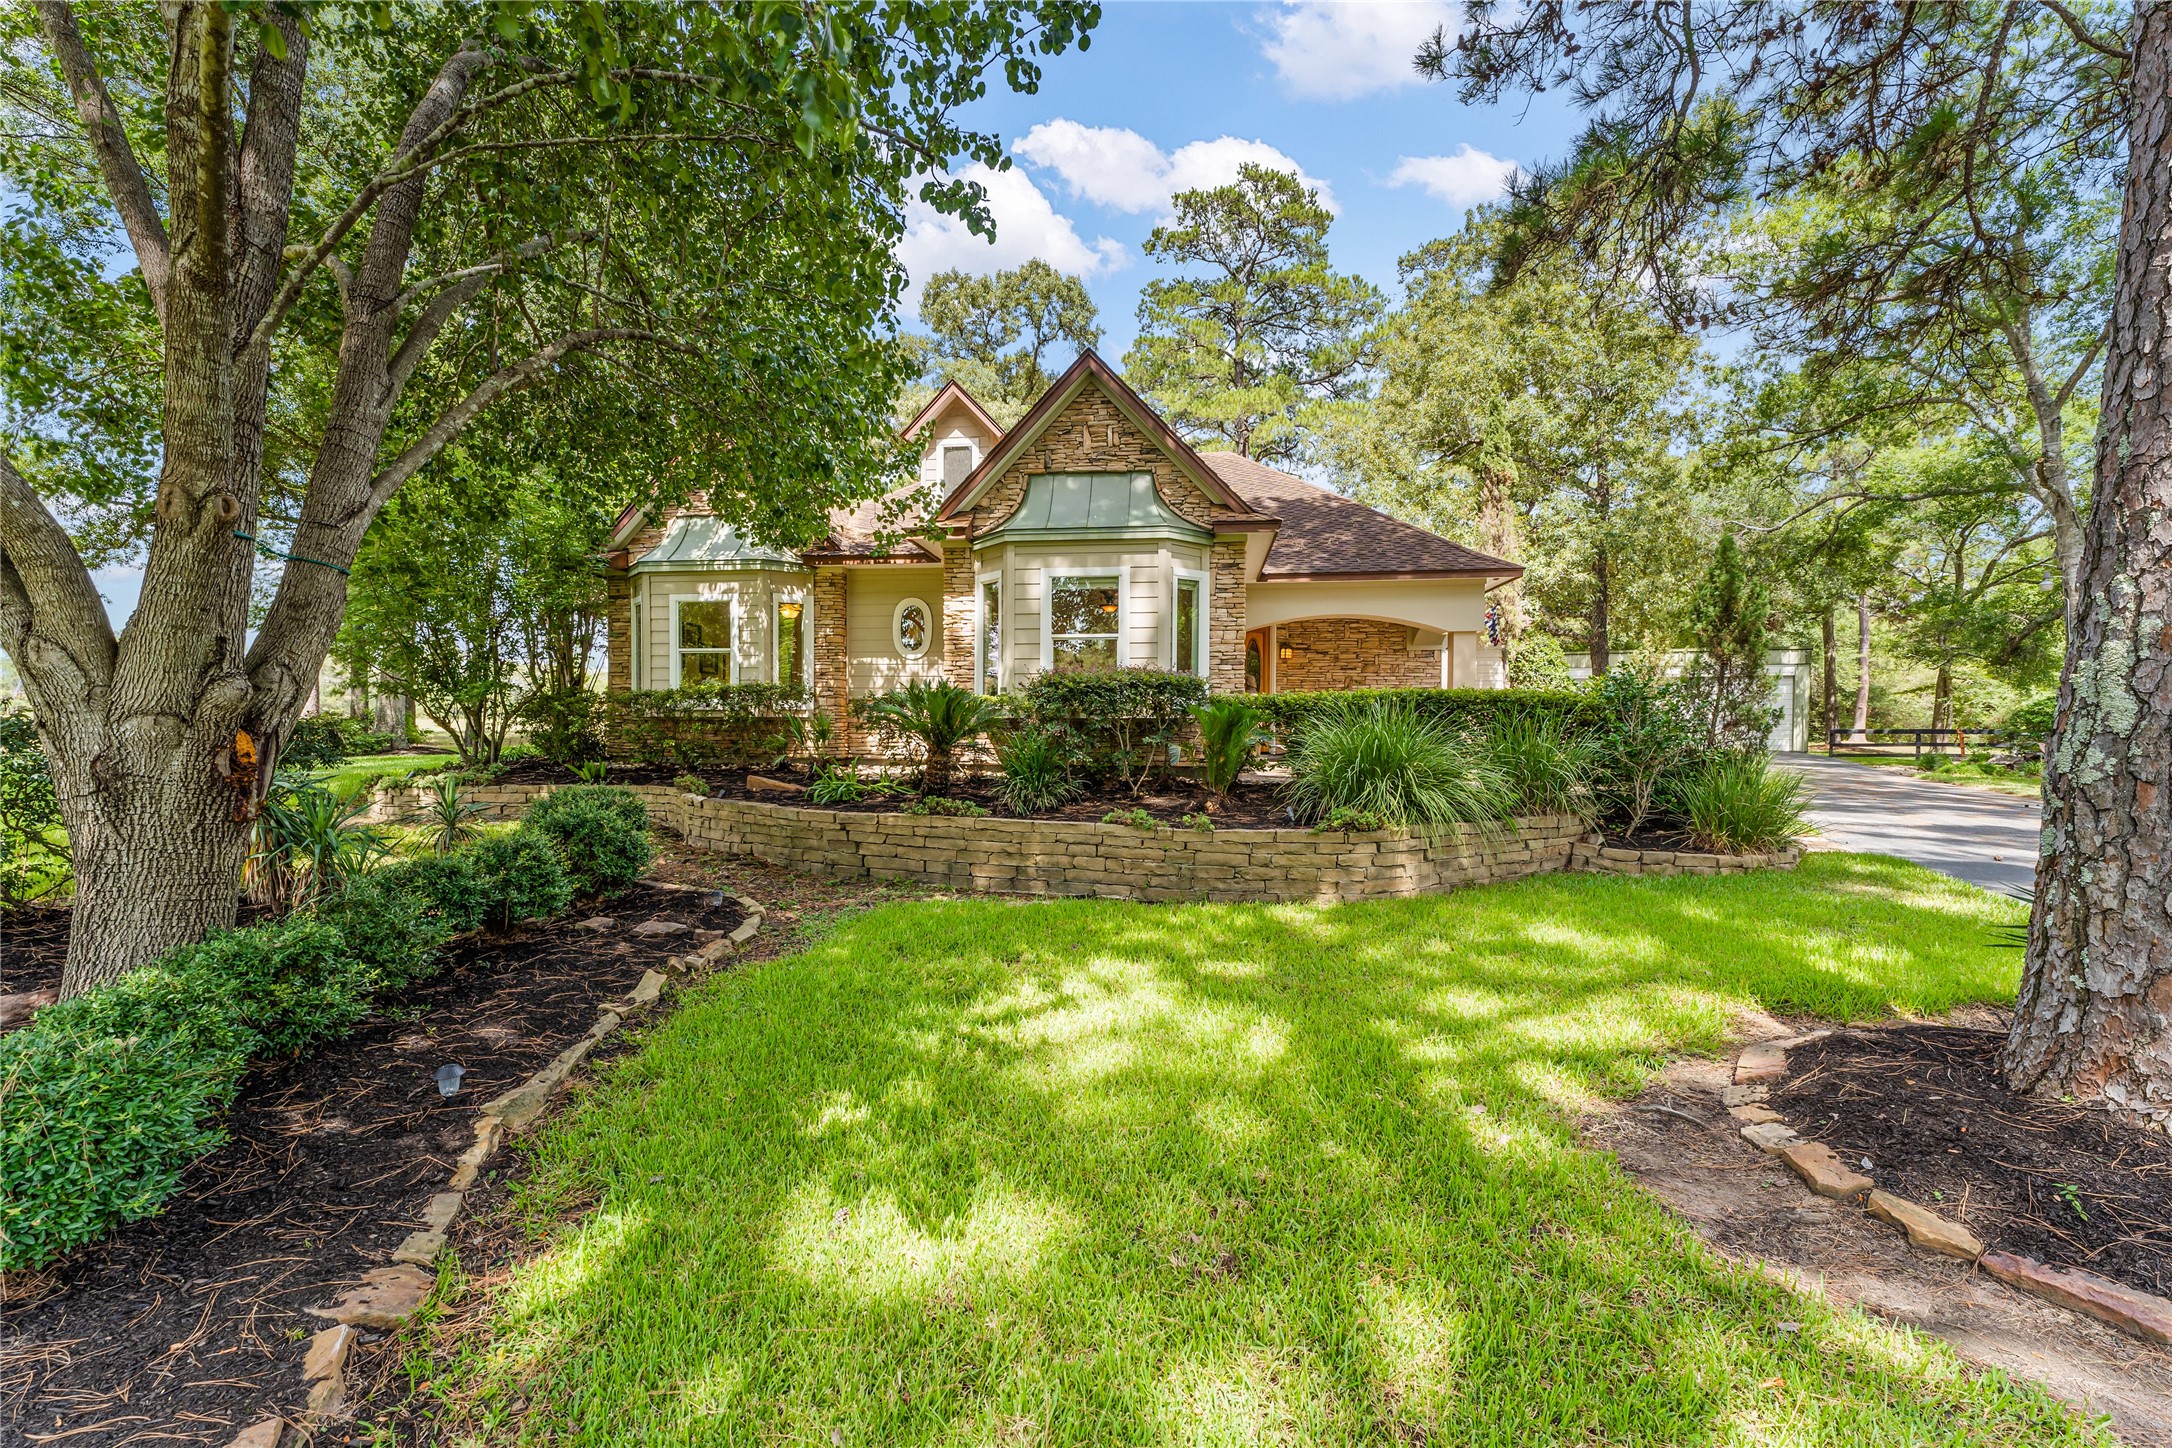 Tucked away on a beautiful country road known for luxury properties on acreage, & less than an hour from downtown Houston is 22388 Murrell Road in Hockley, Texas